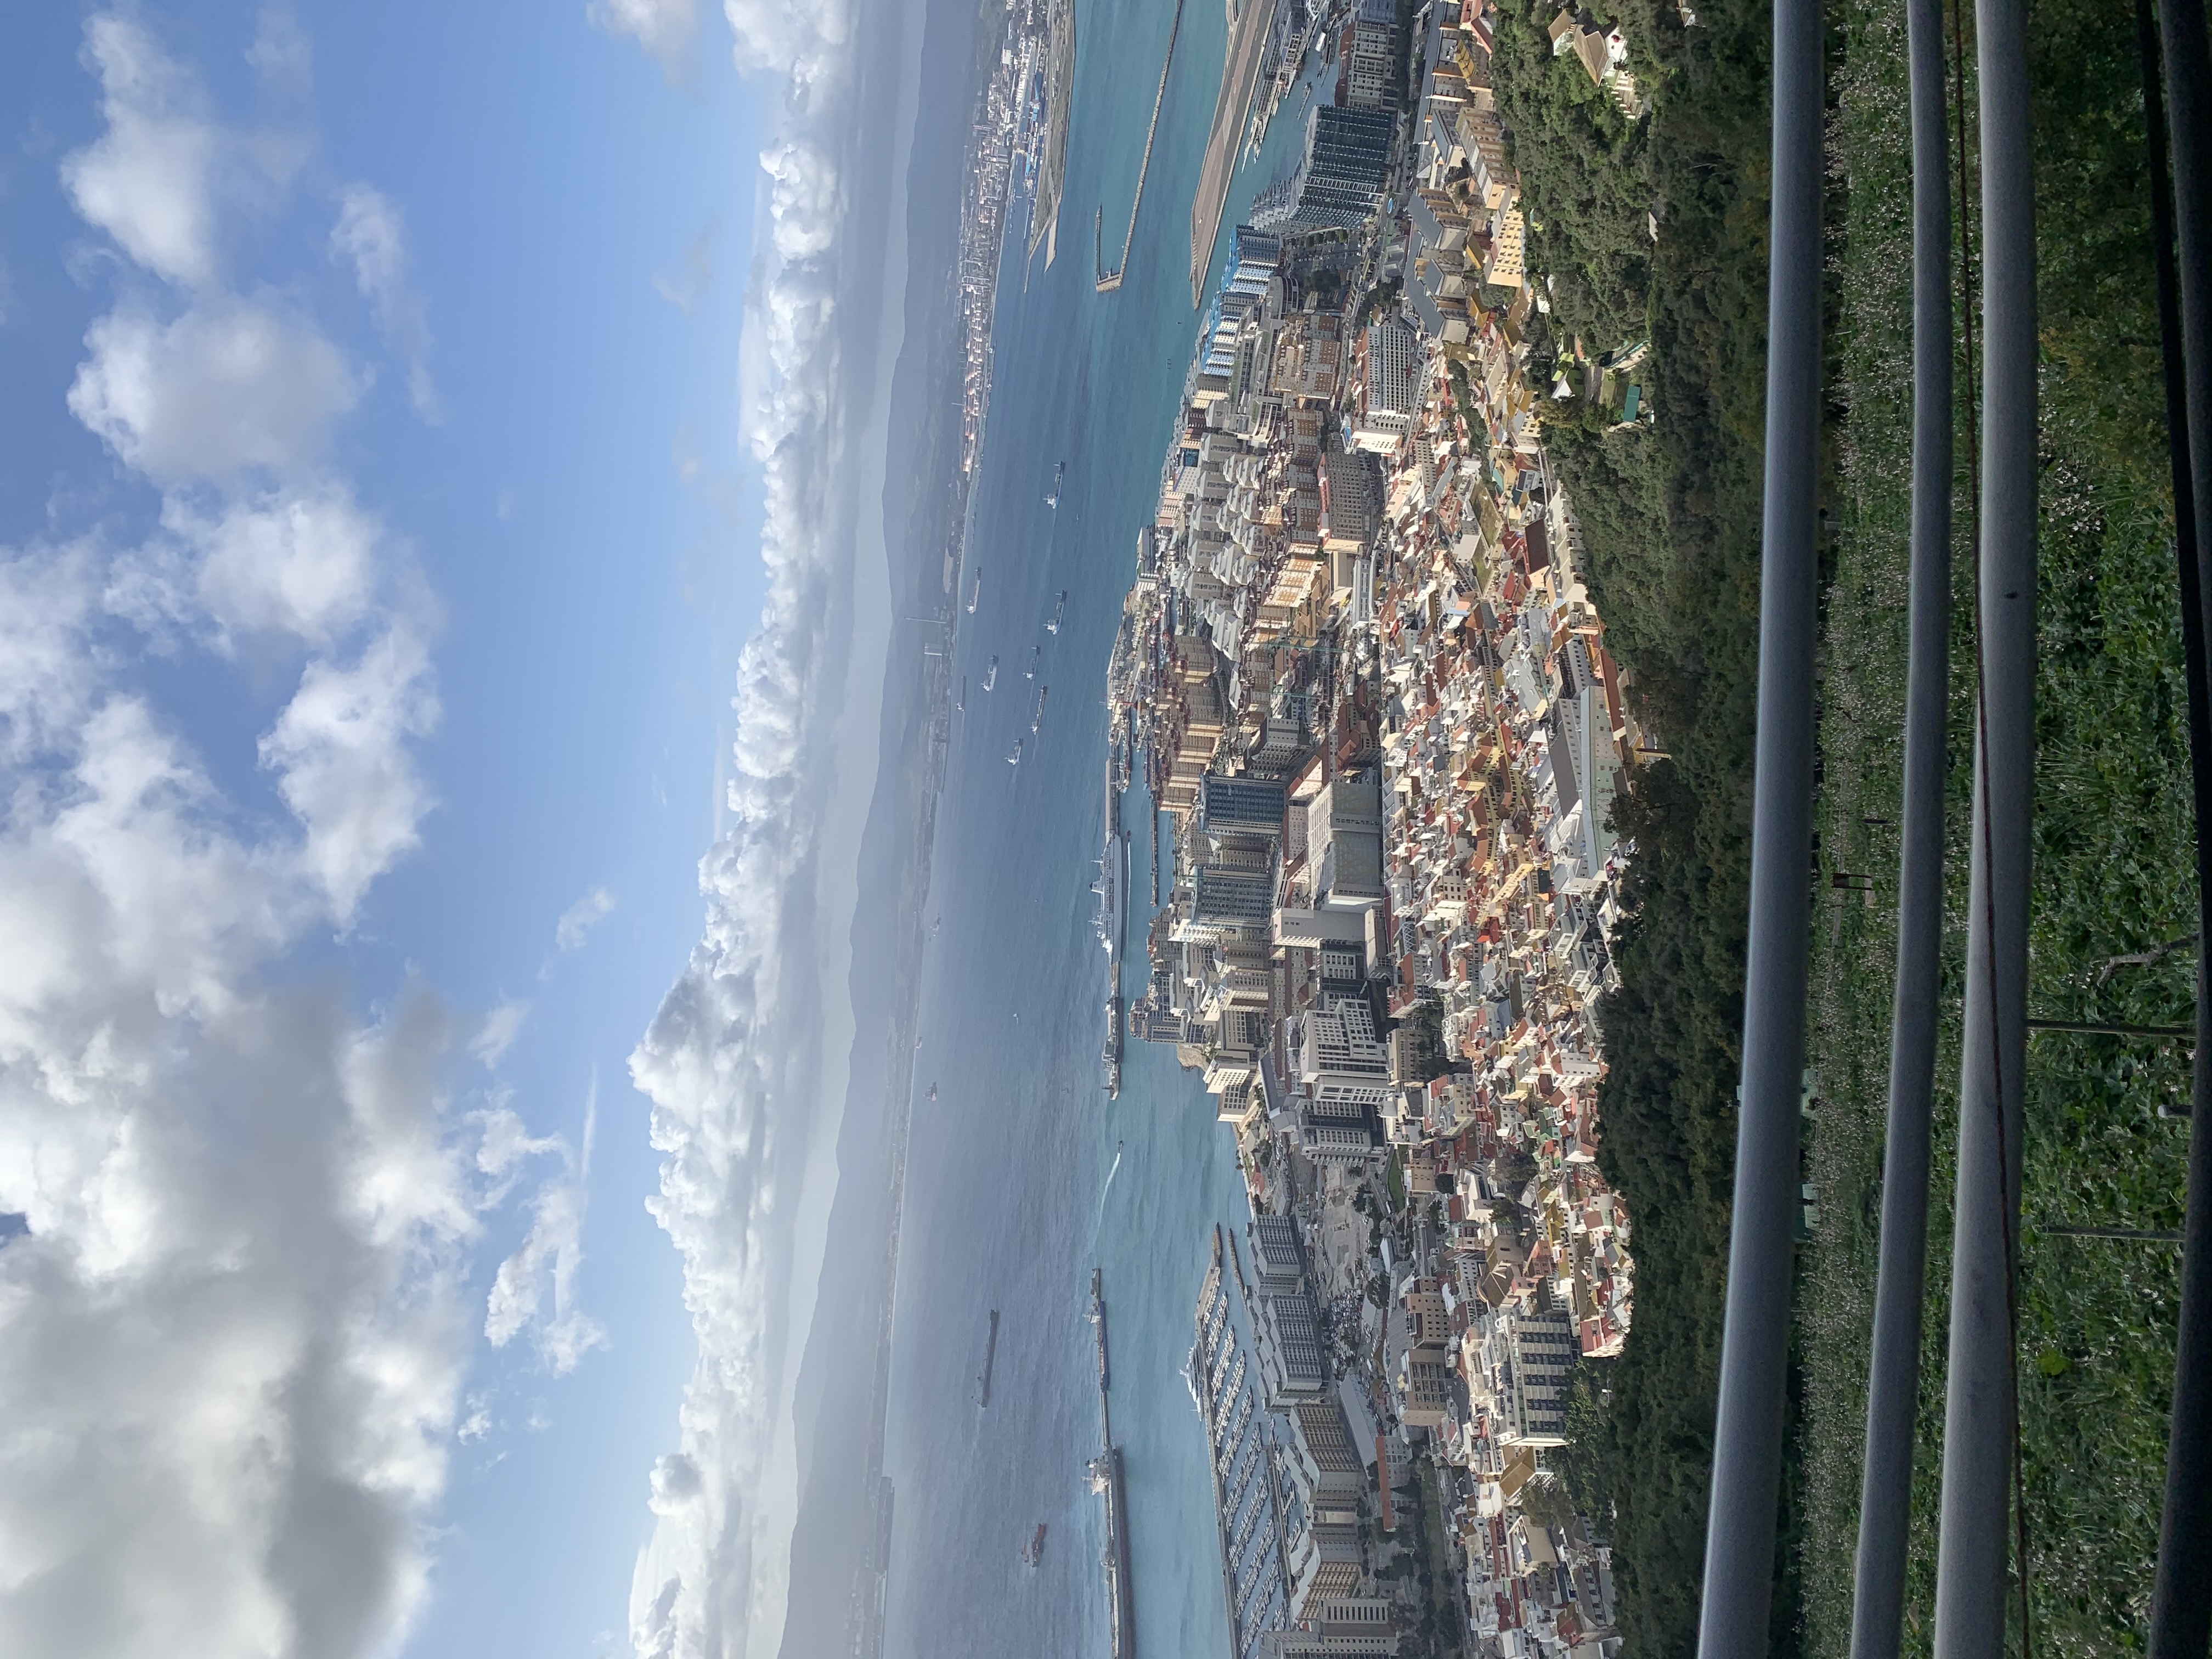 View from the Rock of Gibraltar